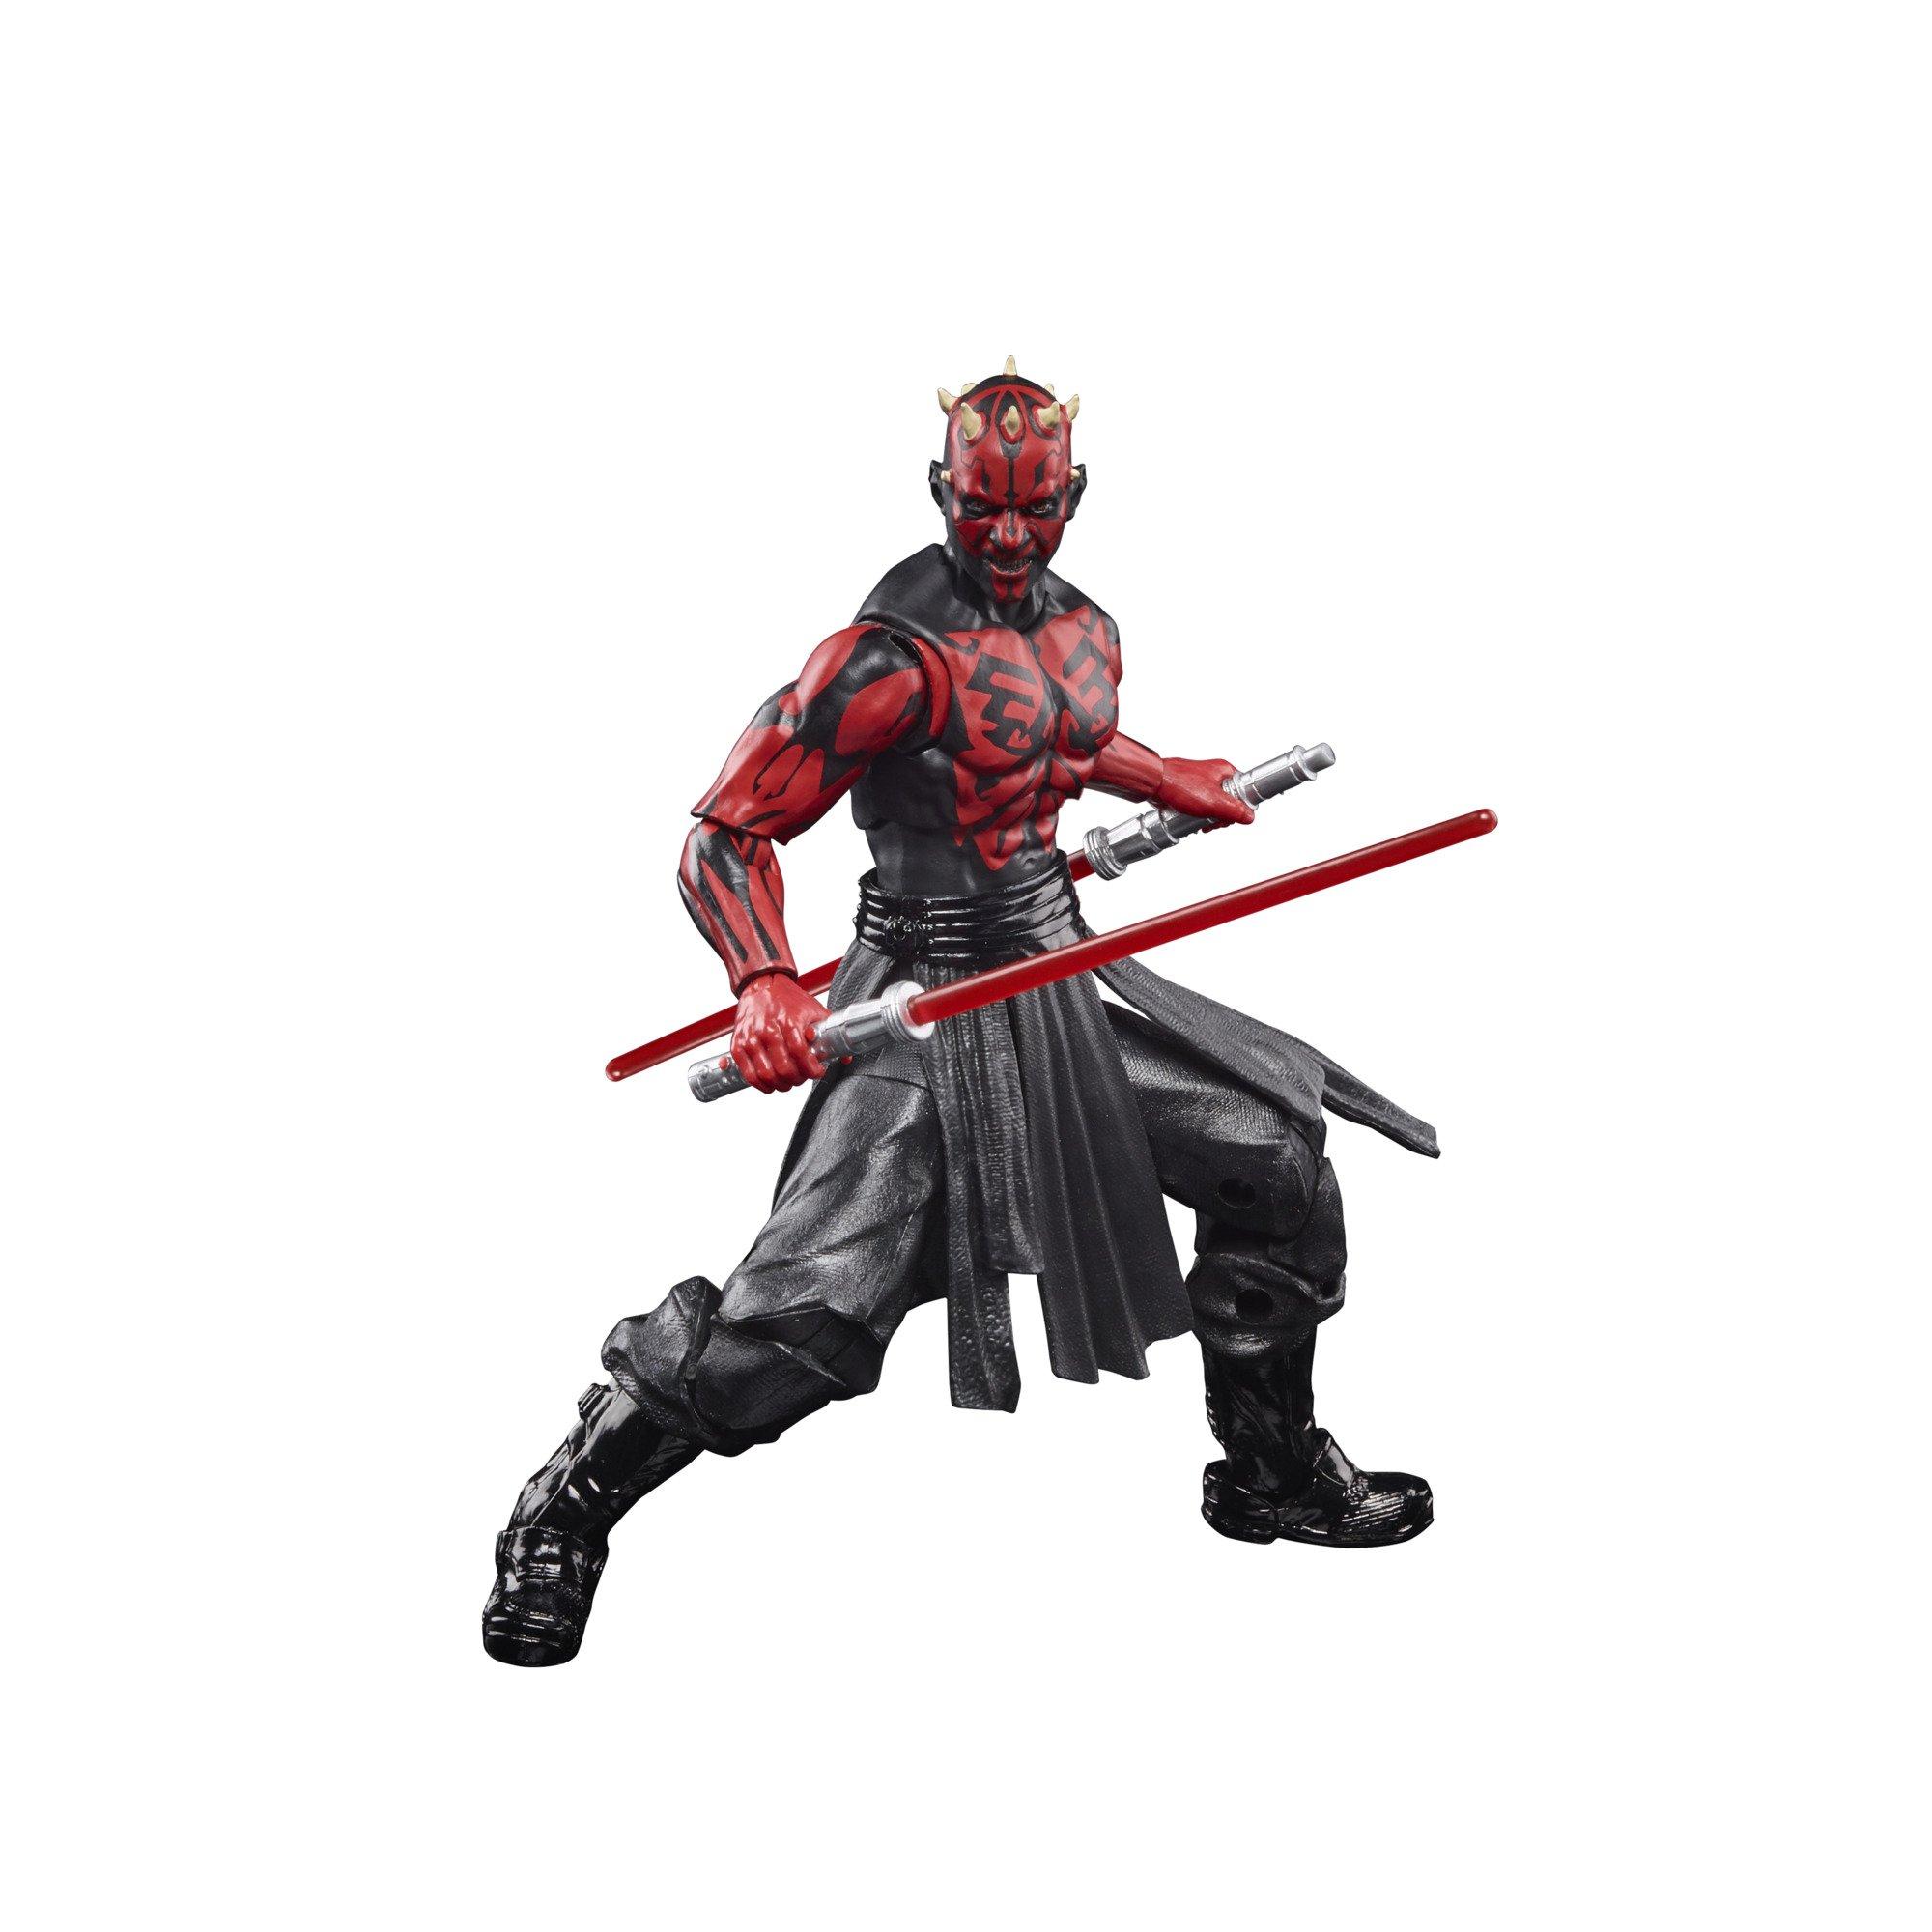 Star Wars Action Figure  Darth Maul Play Art Collectibles Model Toy